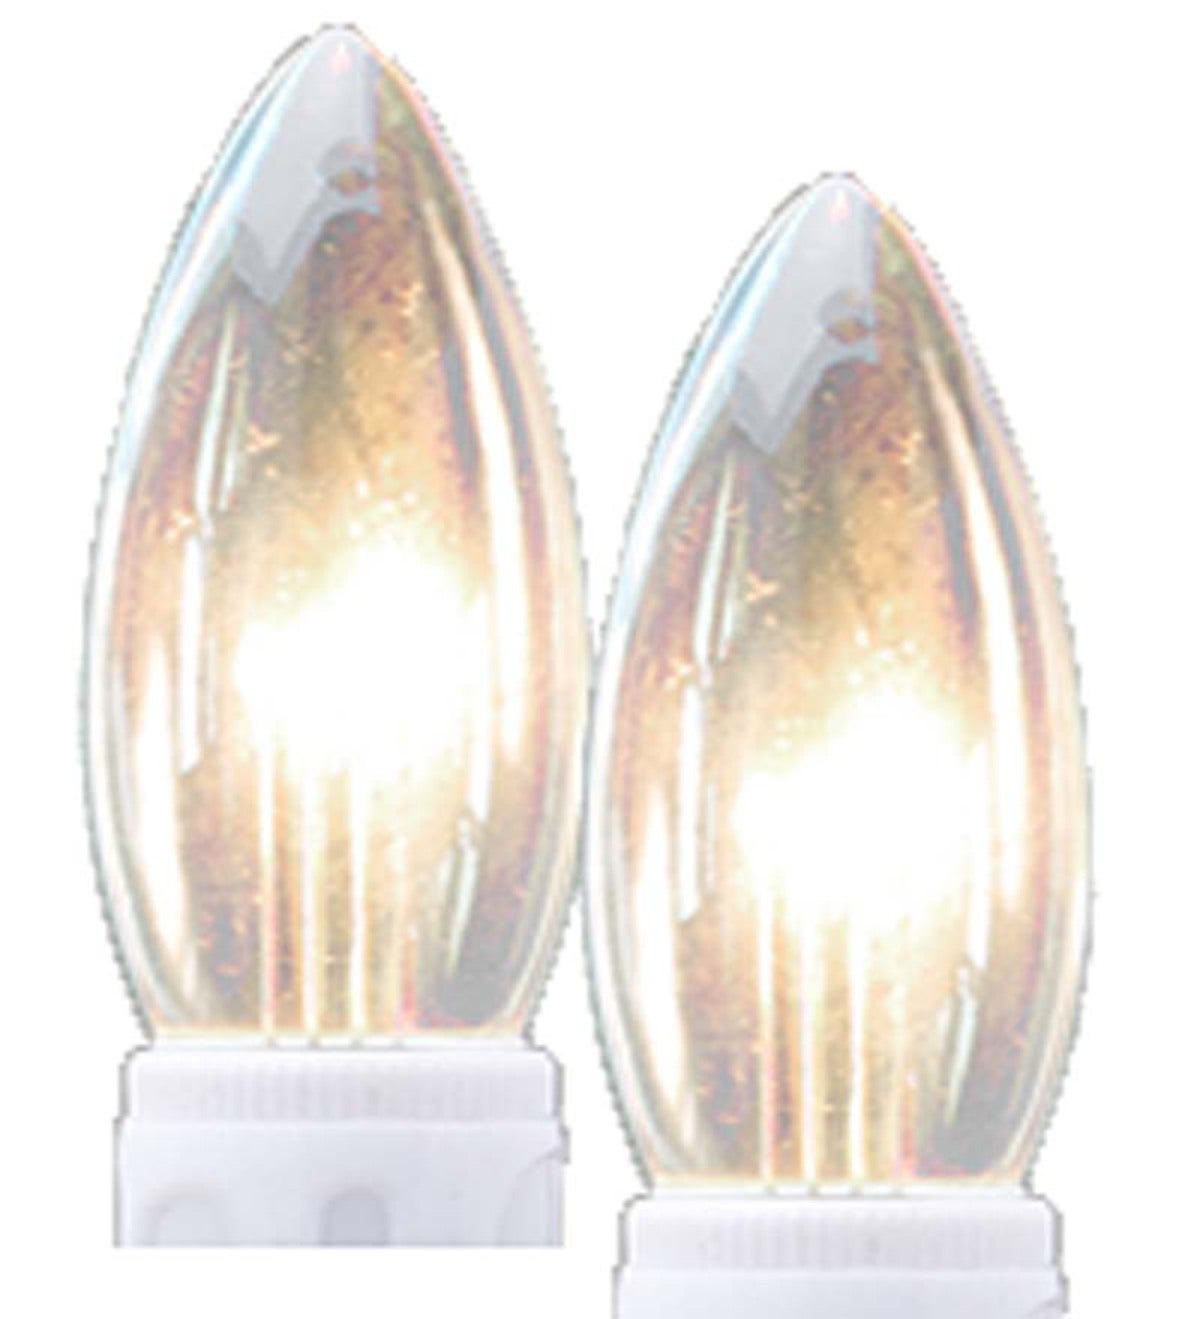 Outward-Facing LED Replacement Bulbs, Set of 2